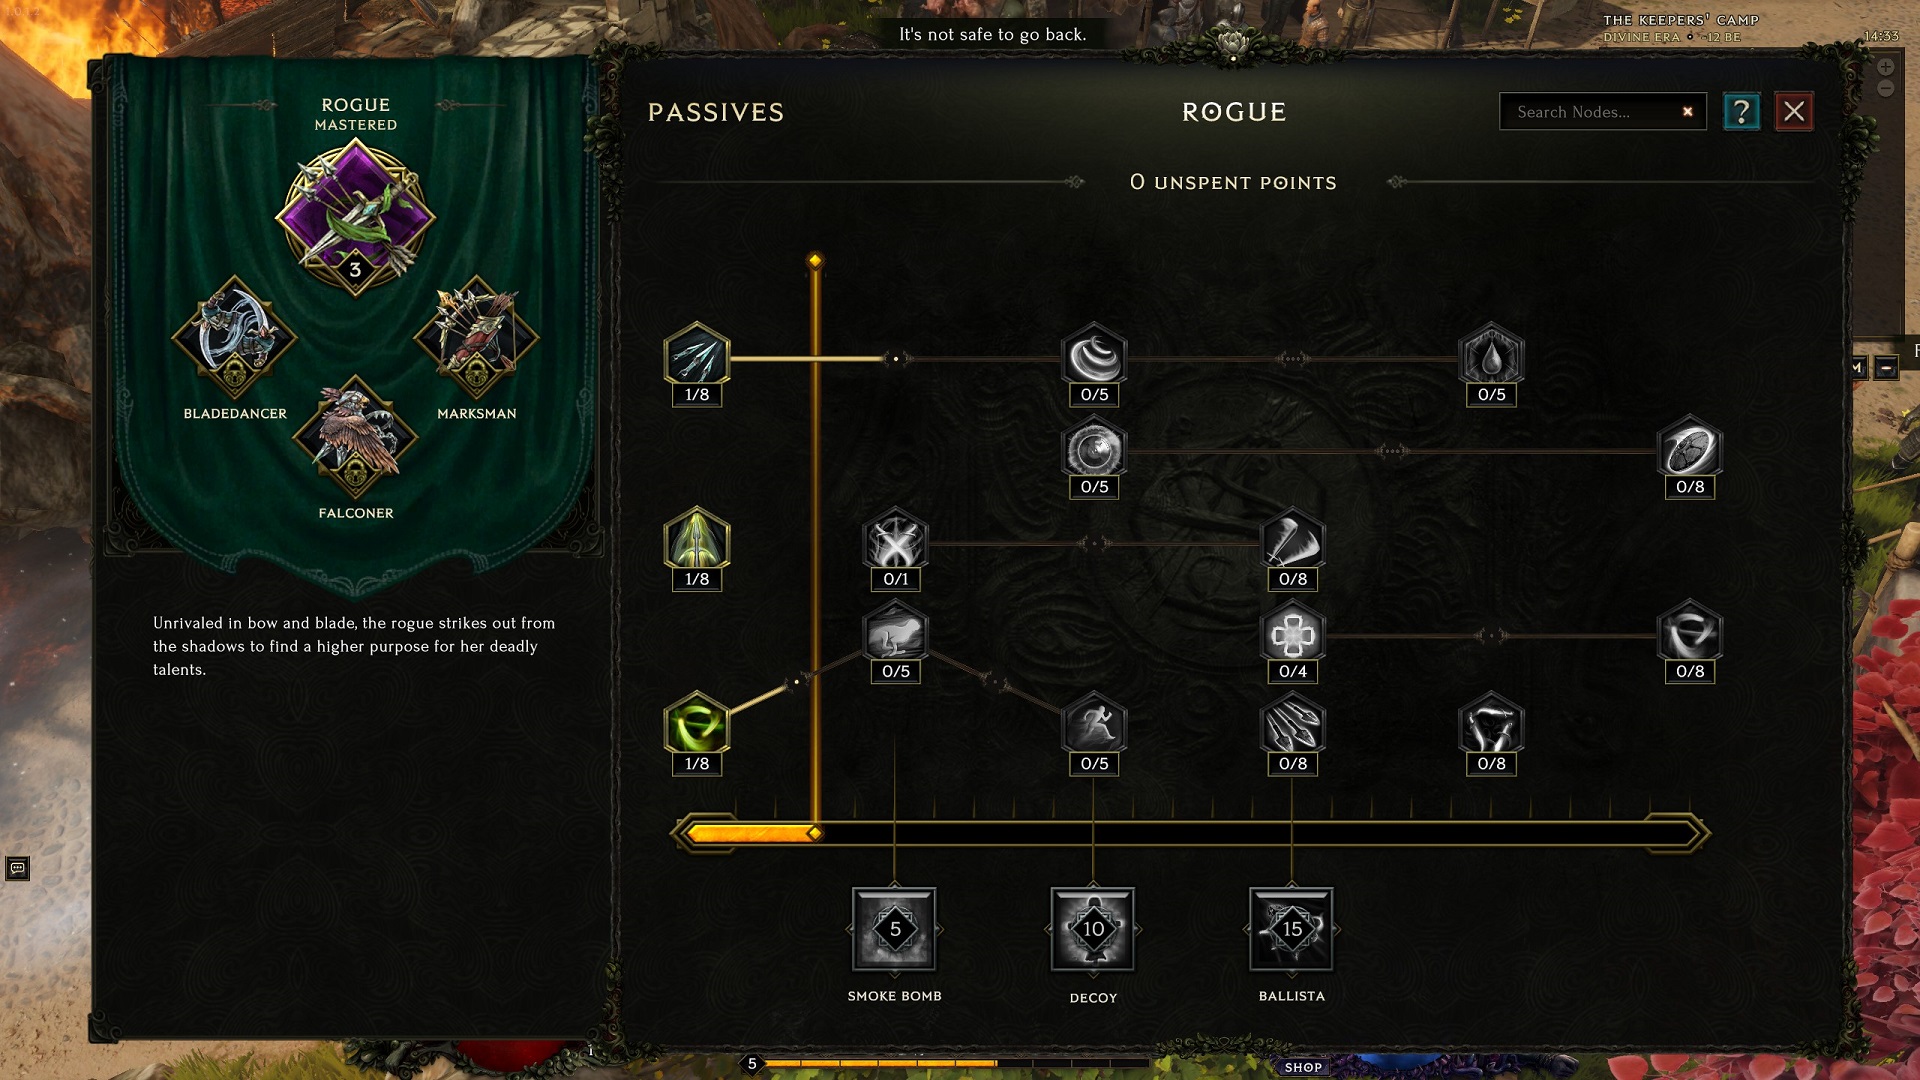 An image of the Rogue's passives in Last Epoch.